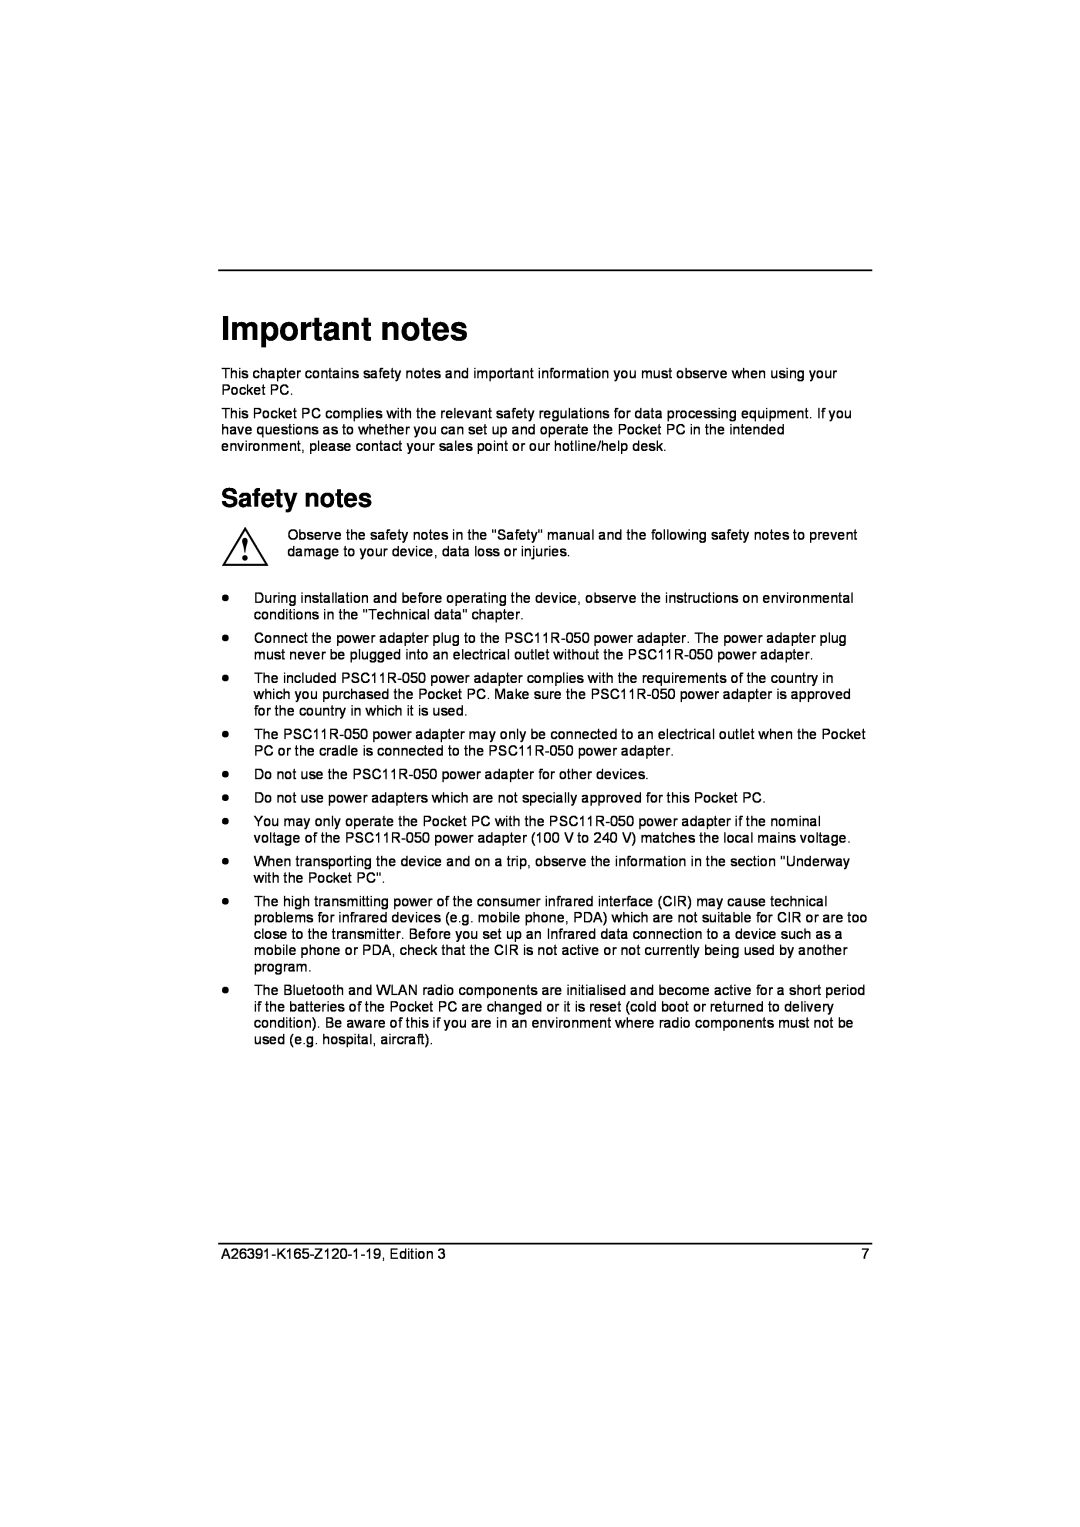 Zweita  Co N/C Series manual Important notes, Safety notes 